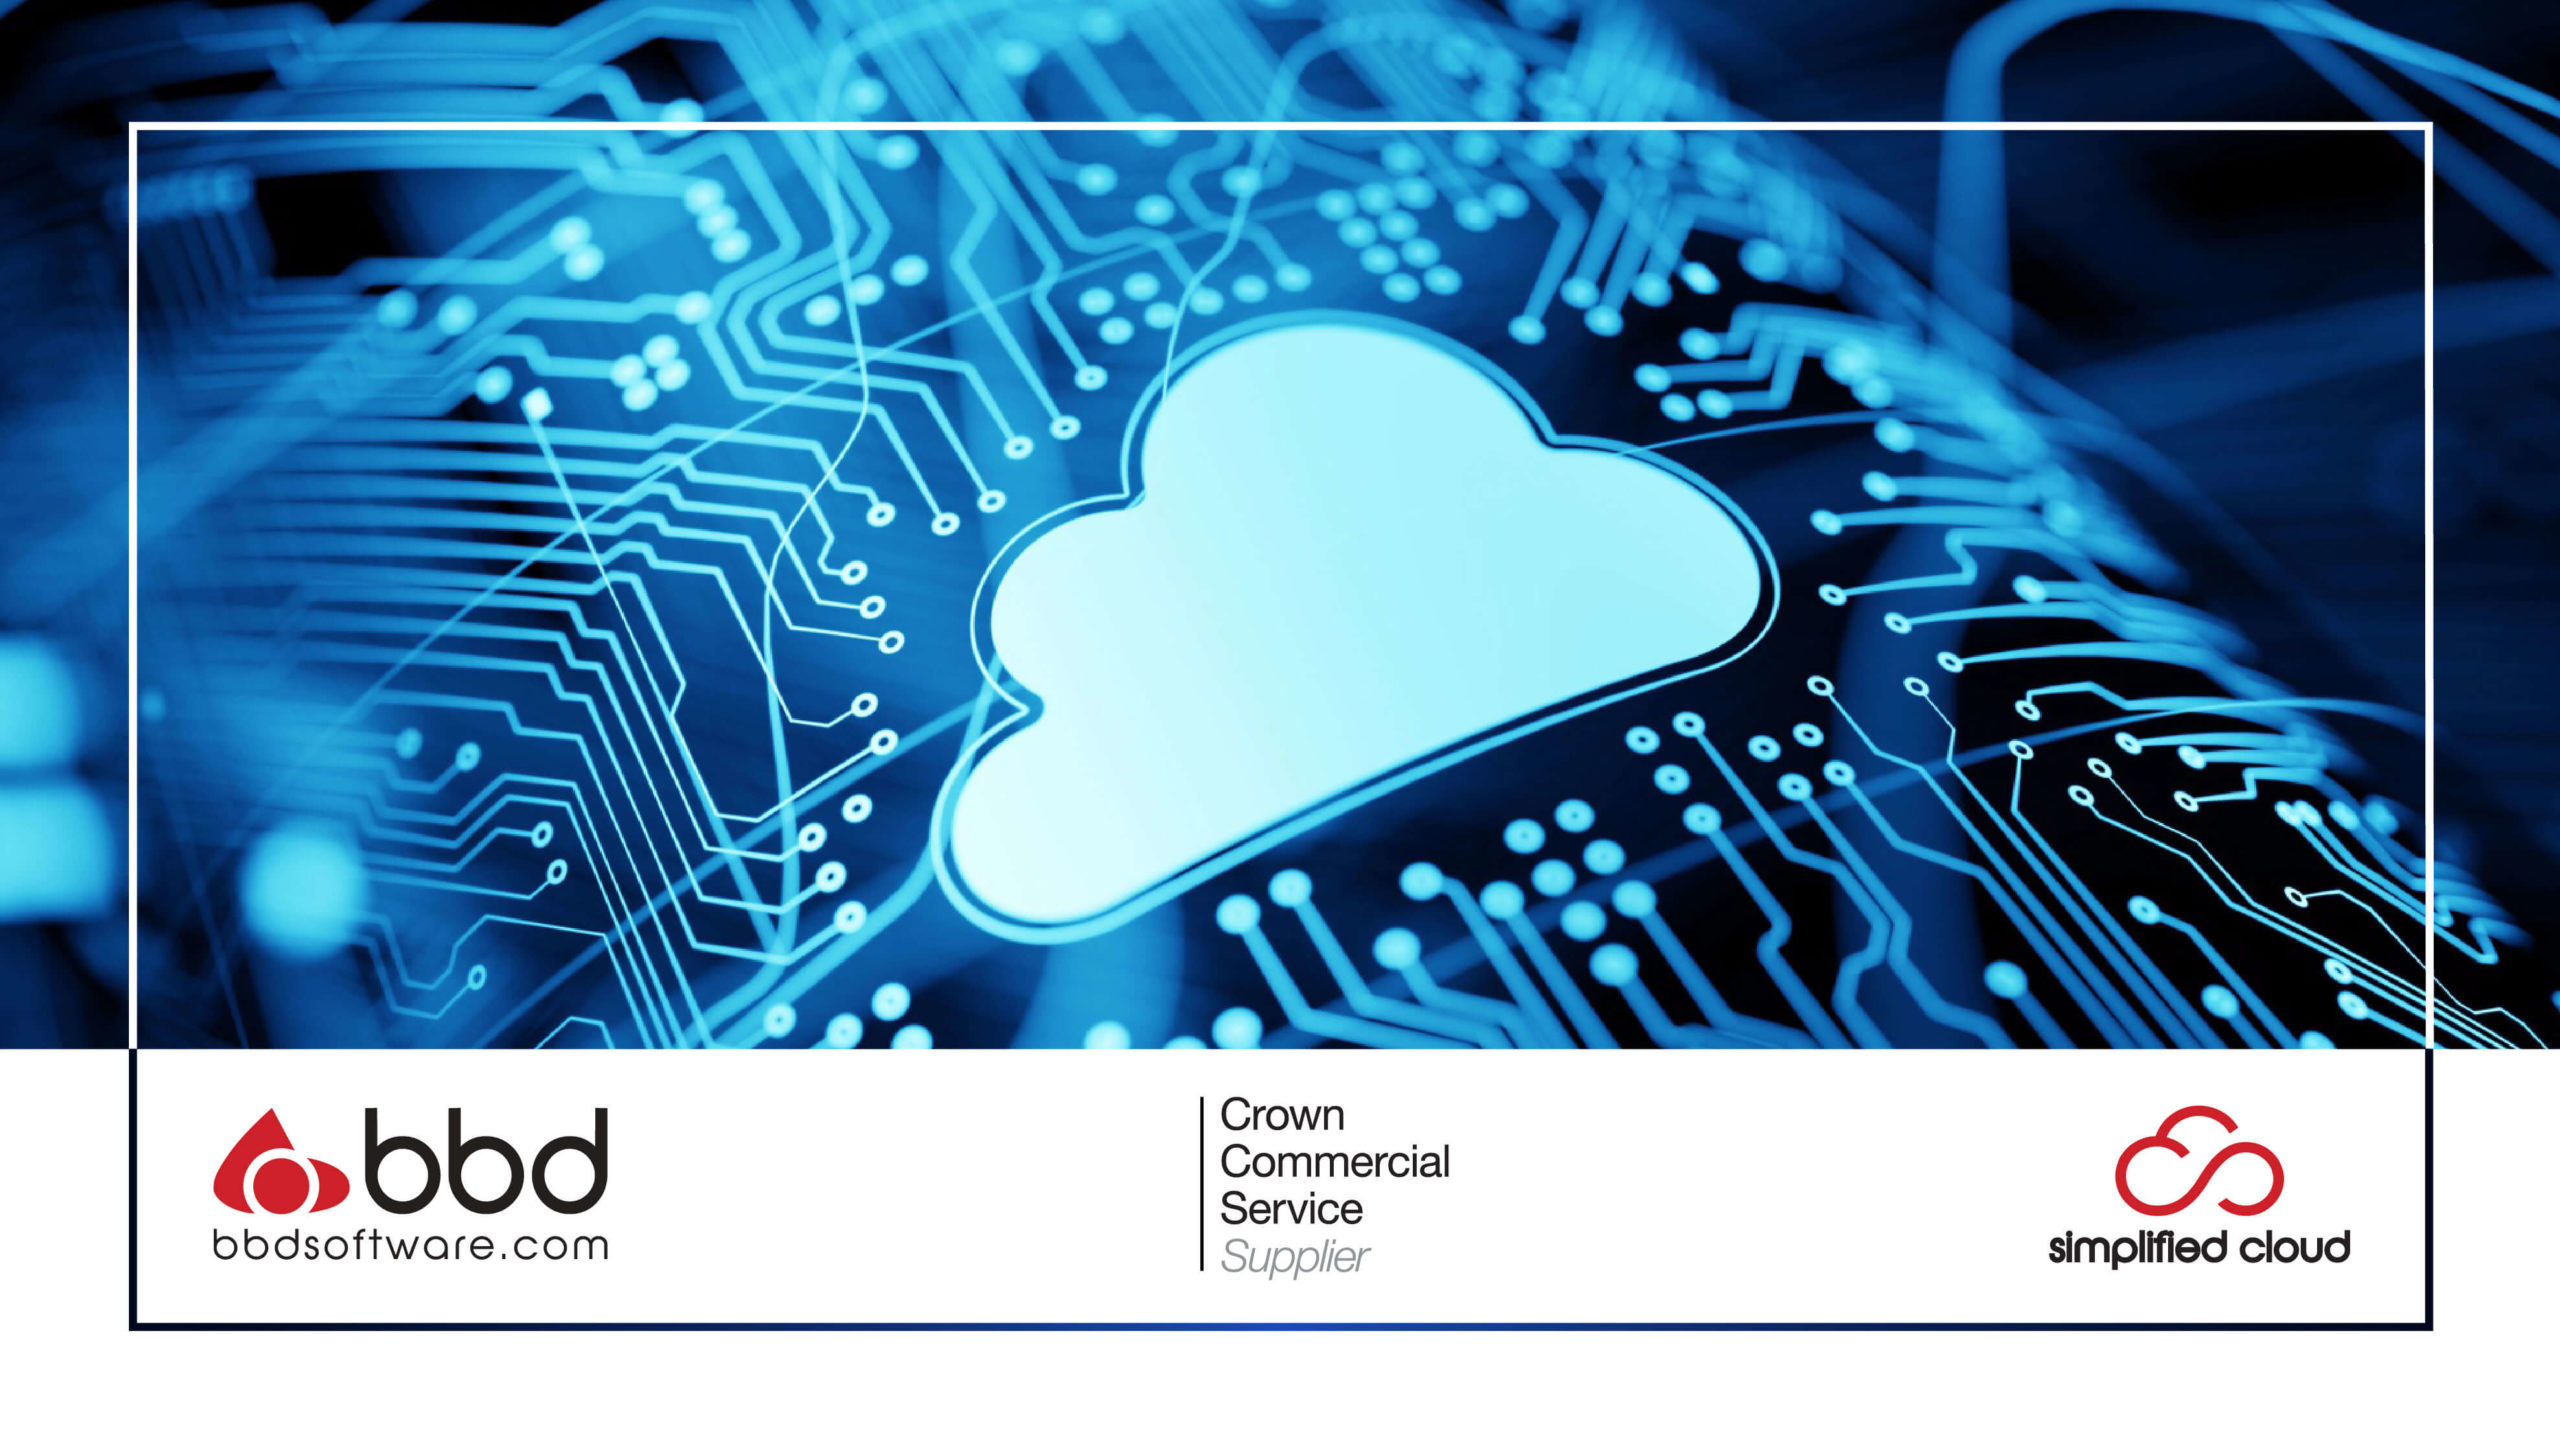 BBD awarded place on the UK’s G-Cloud 12 framework on the CCS Digital Marketplace